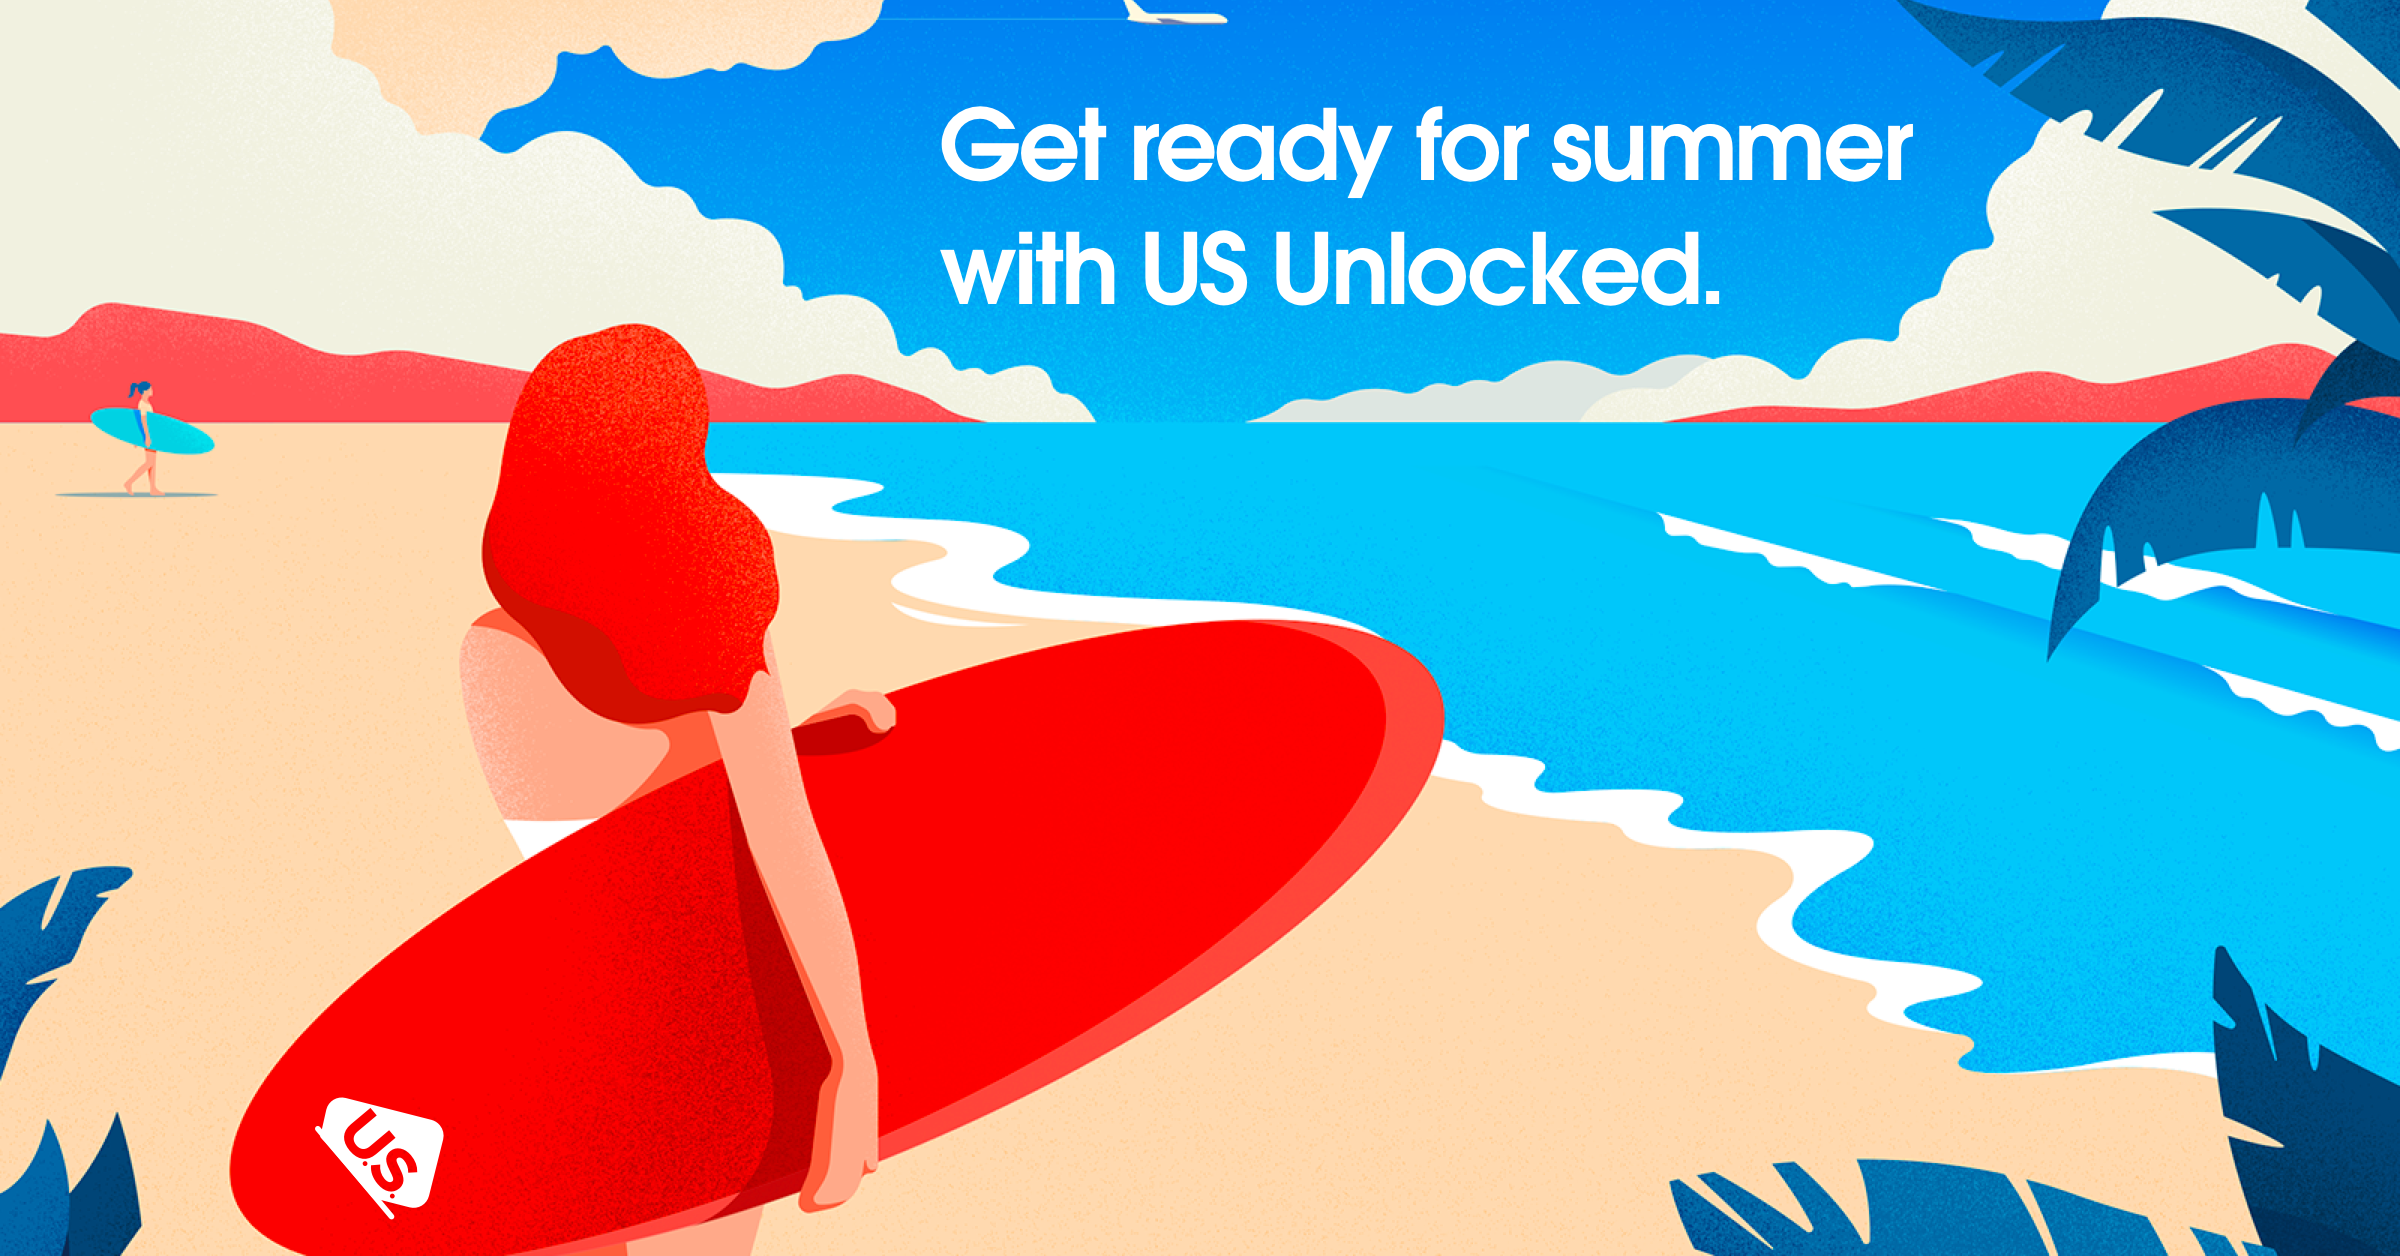 Start your Summer off Right with US Unlocked!